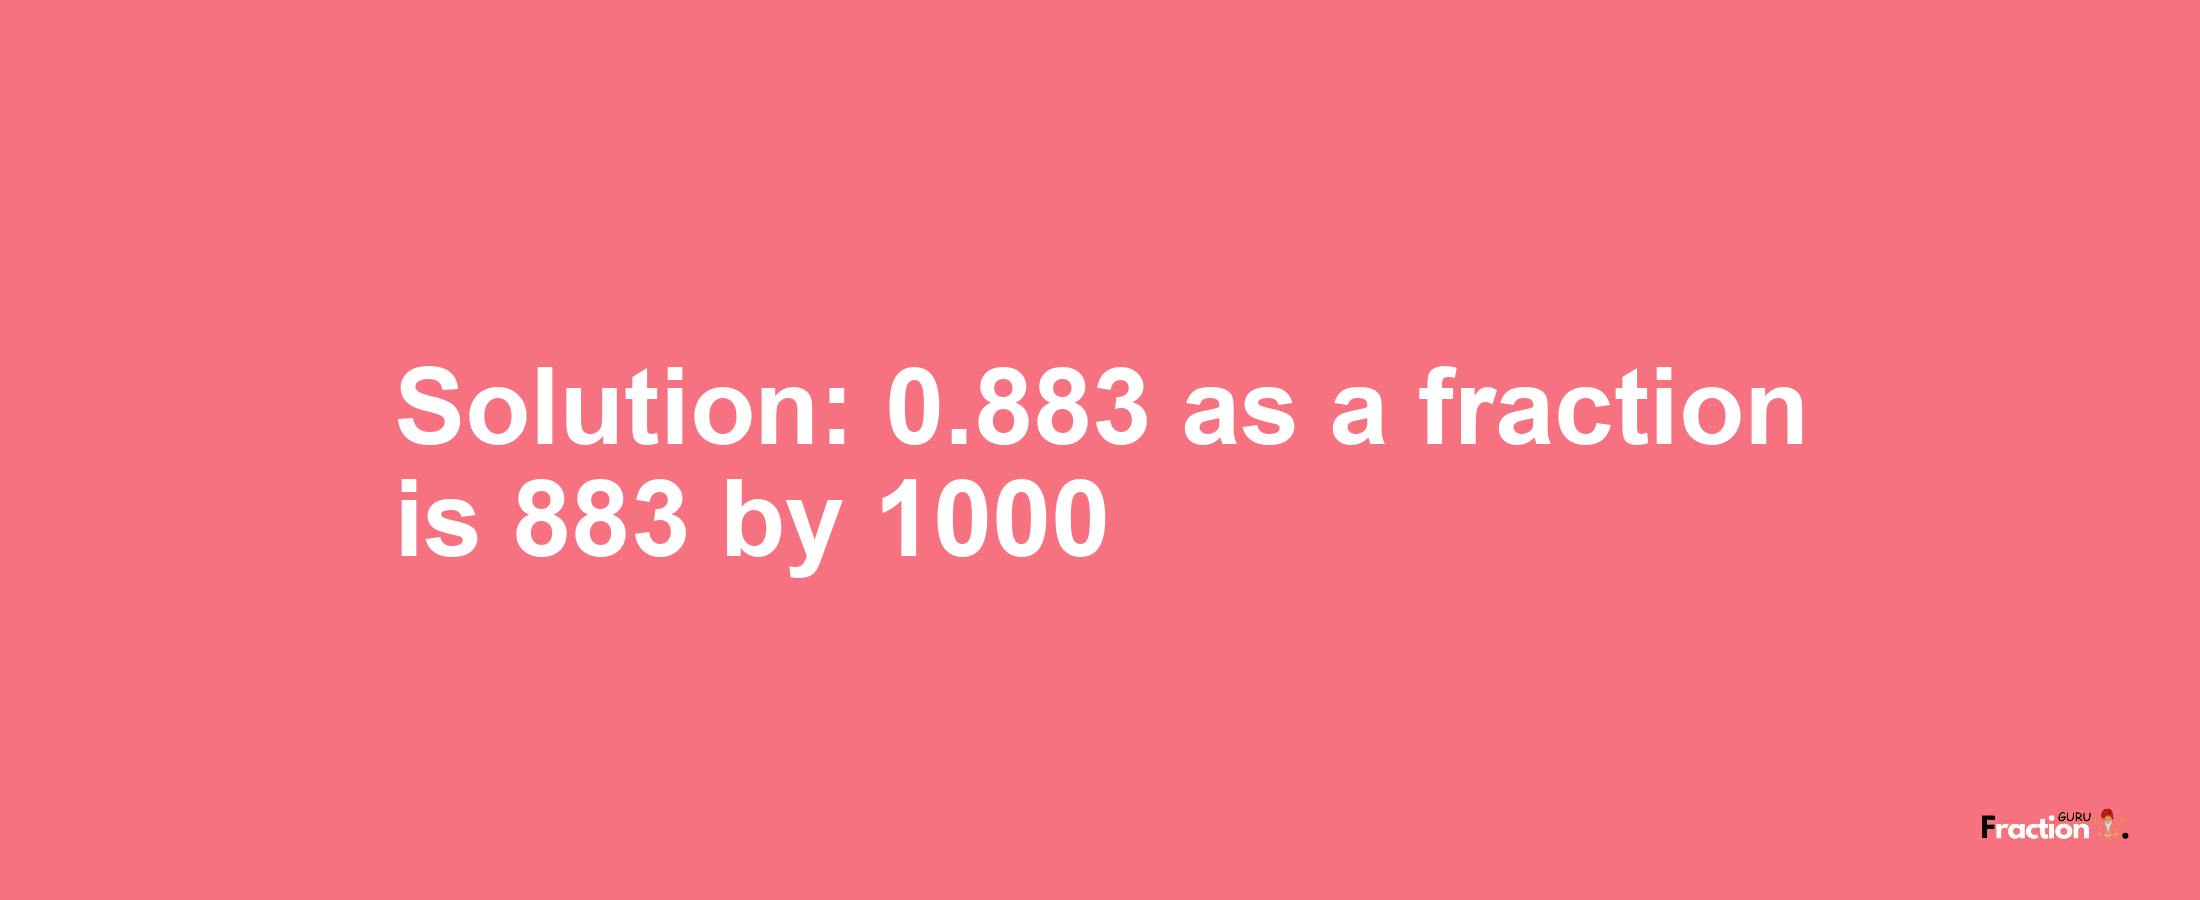 Solution:0.883 as a fraction is 883/1000